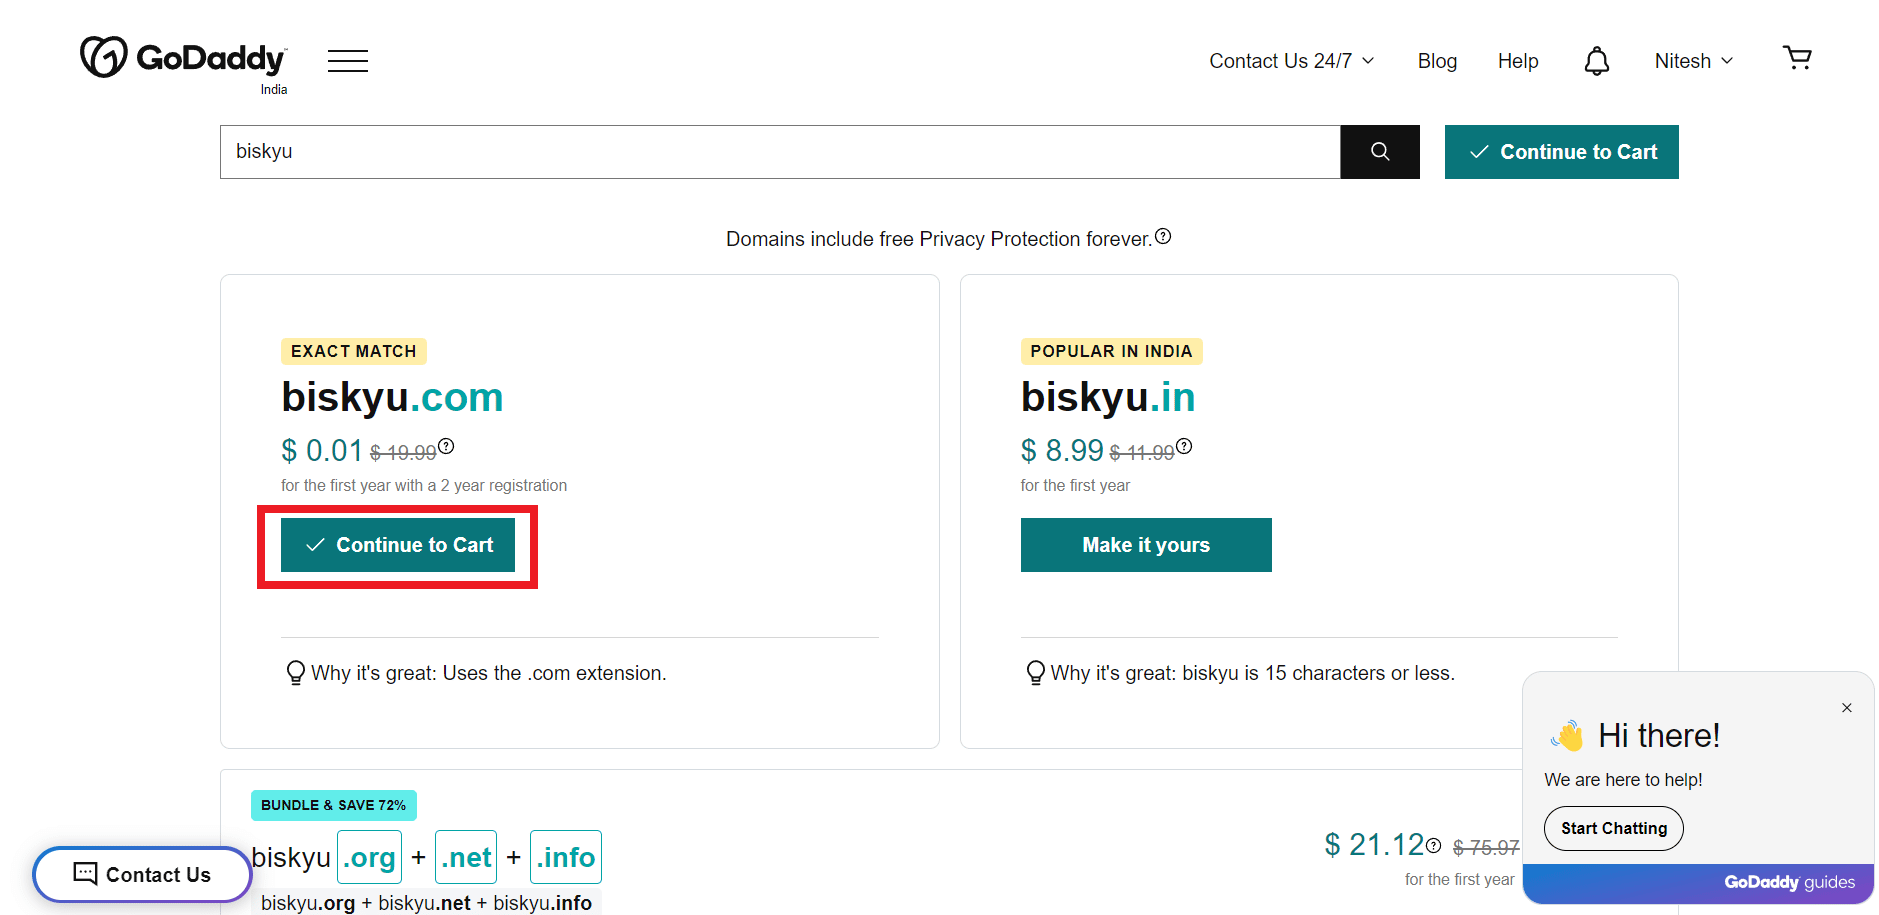 Now click on Continue to Cart.